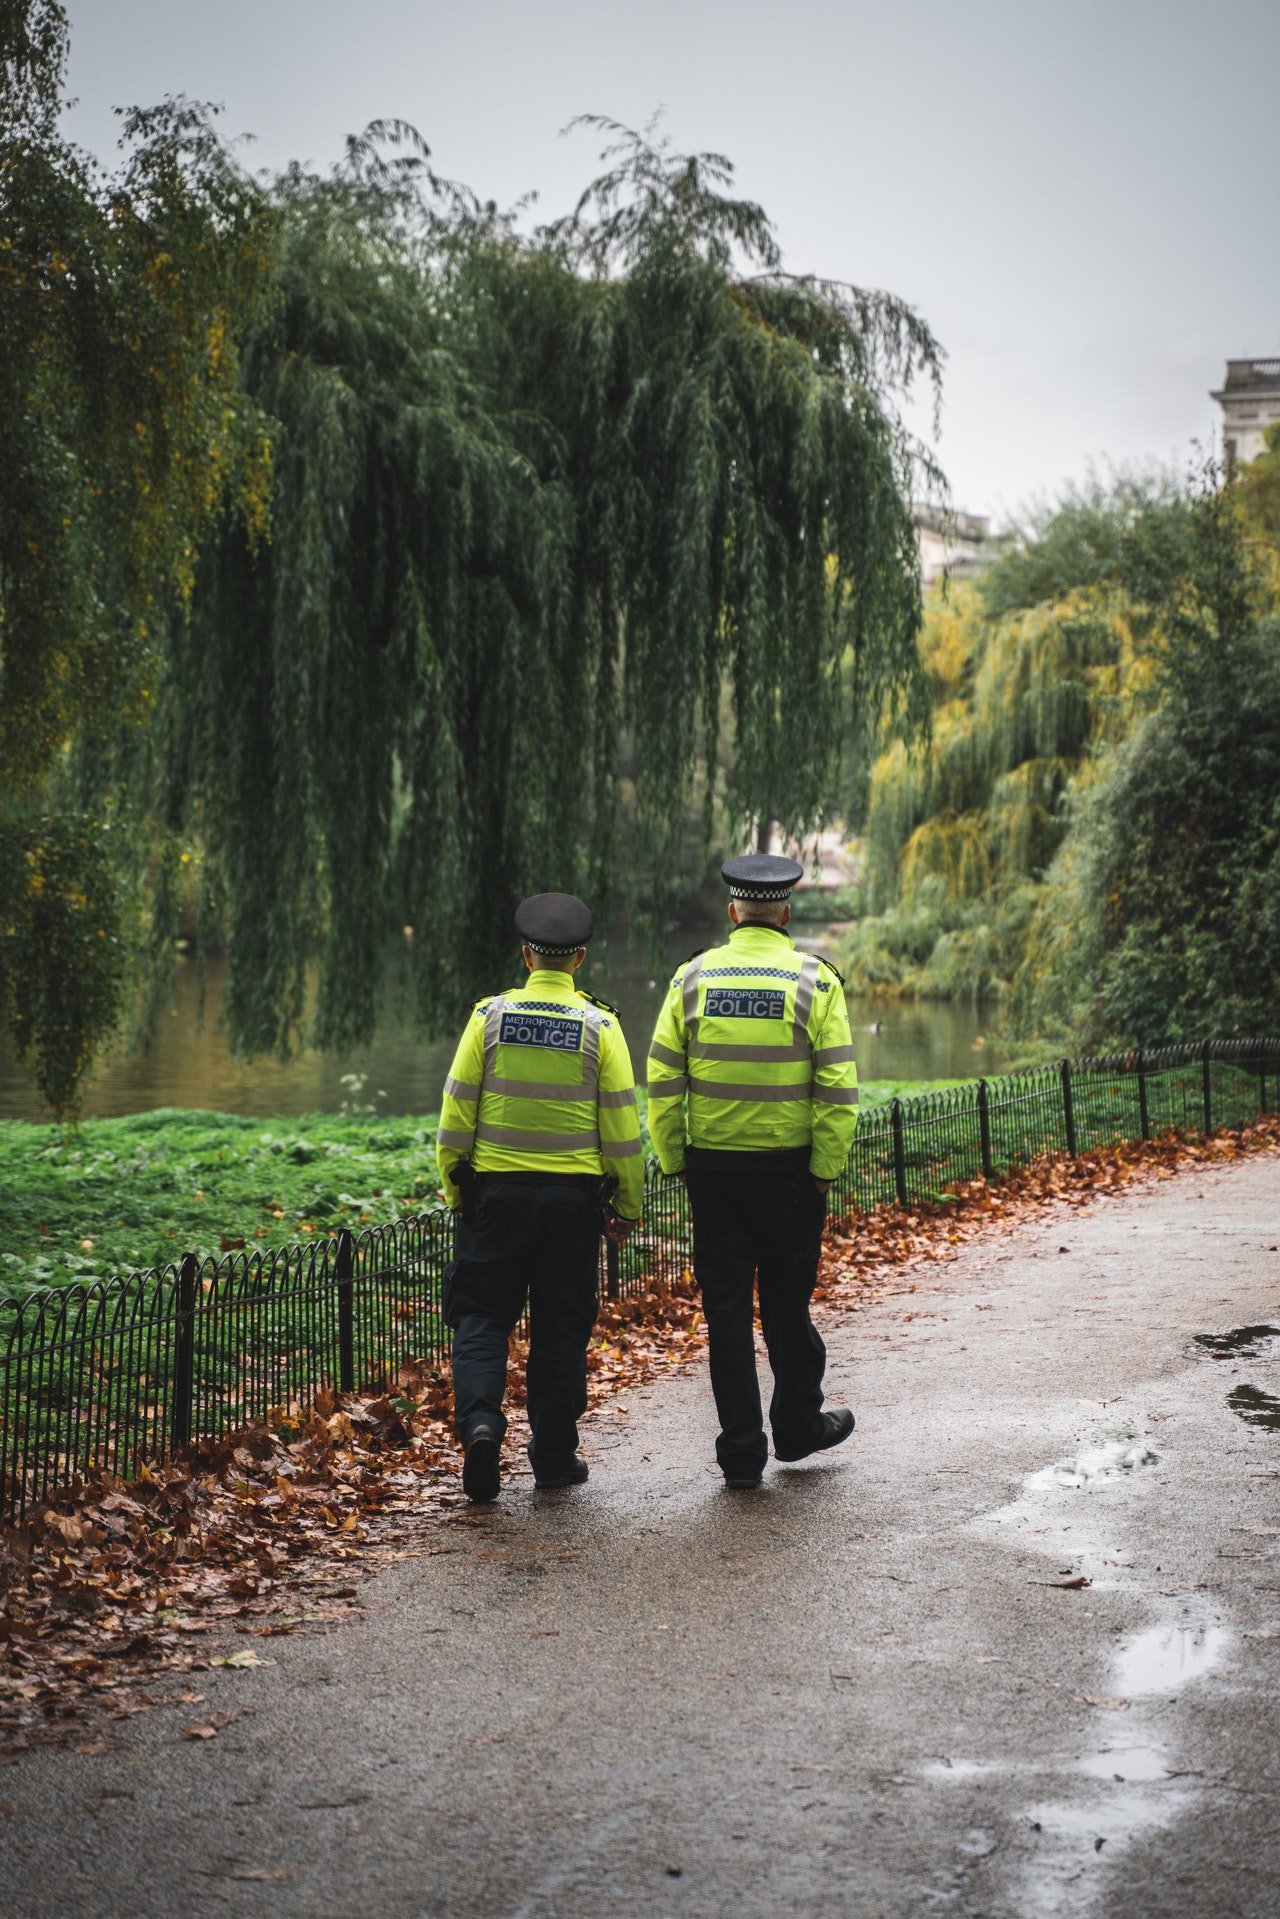 Two police officers working down the road | Photo: Pexels